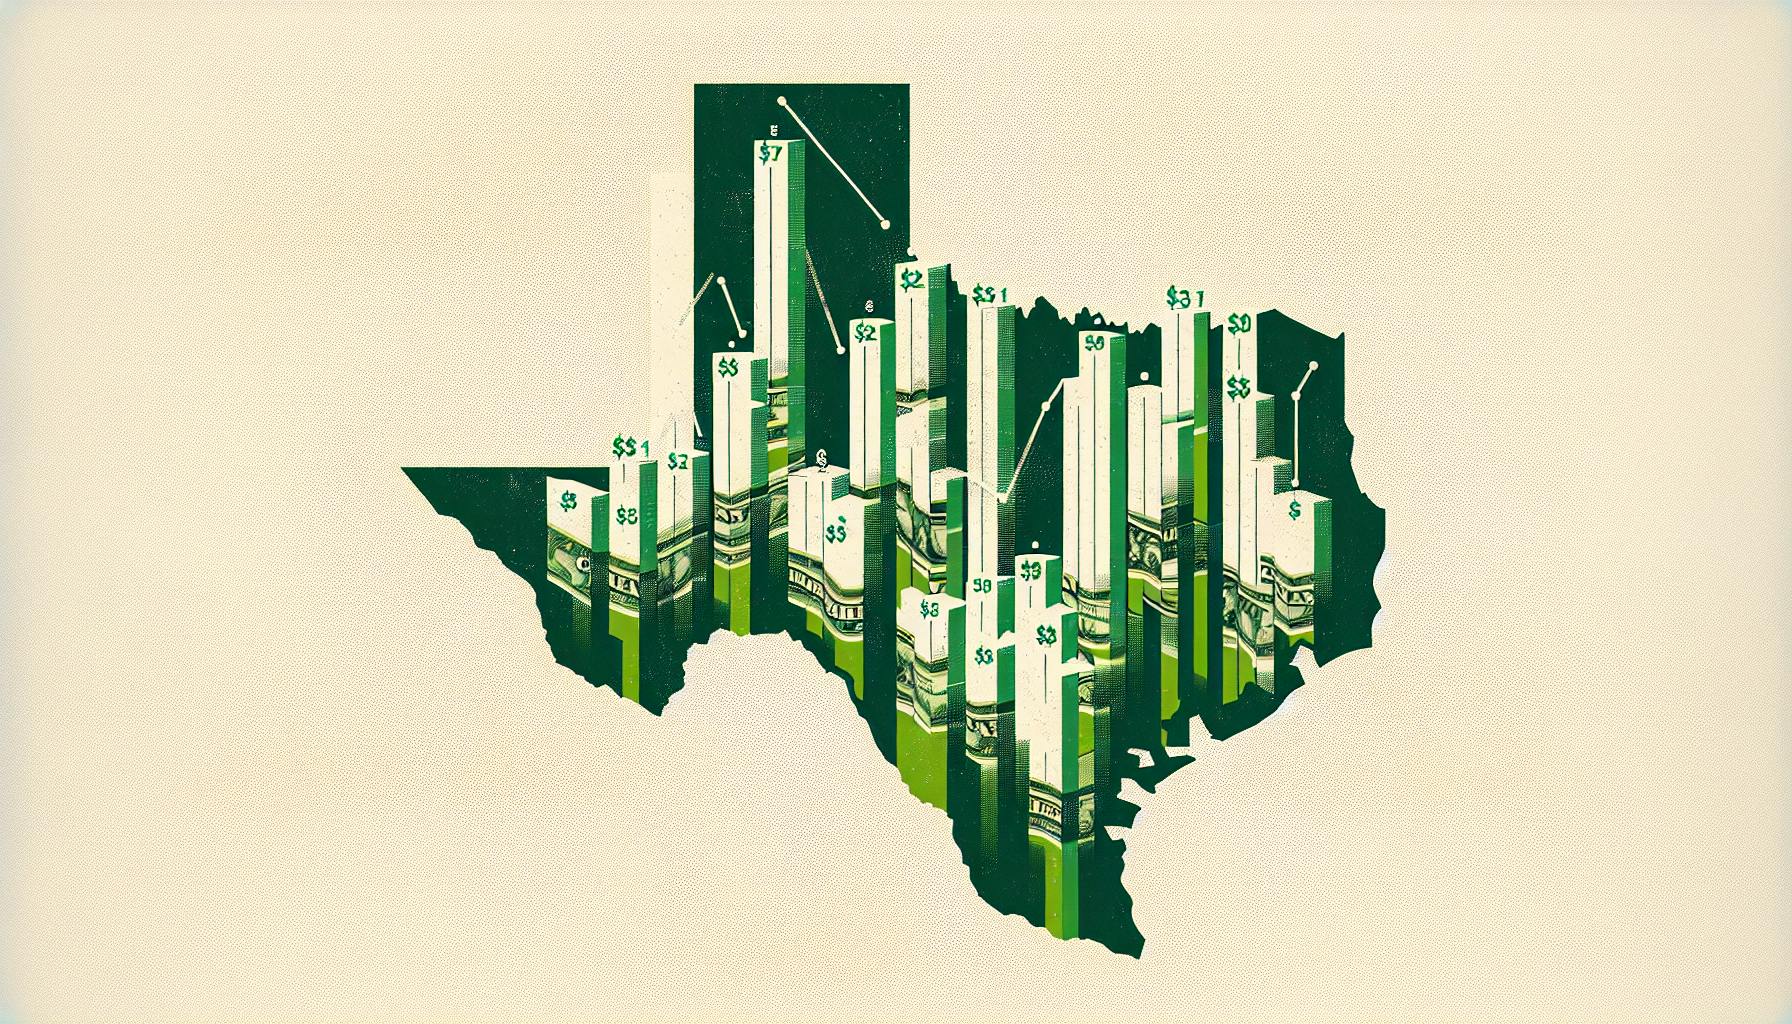 Finance Salaries in Texas: Lone Star Ledger - Financial Fortunes